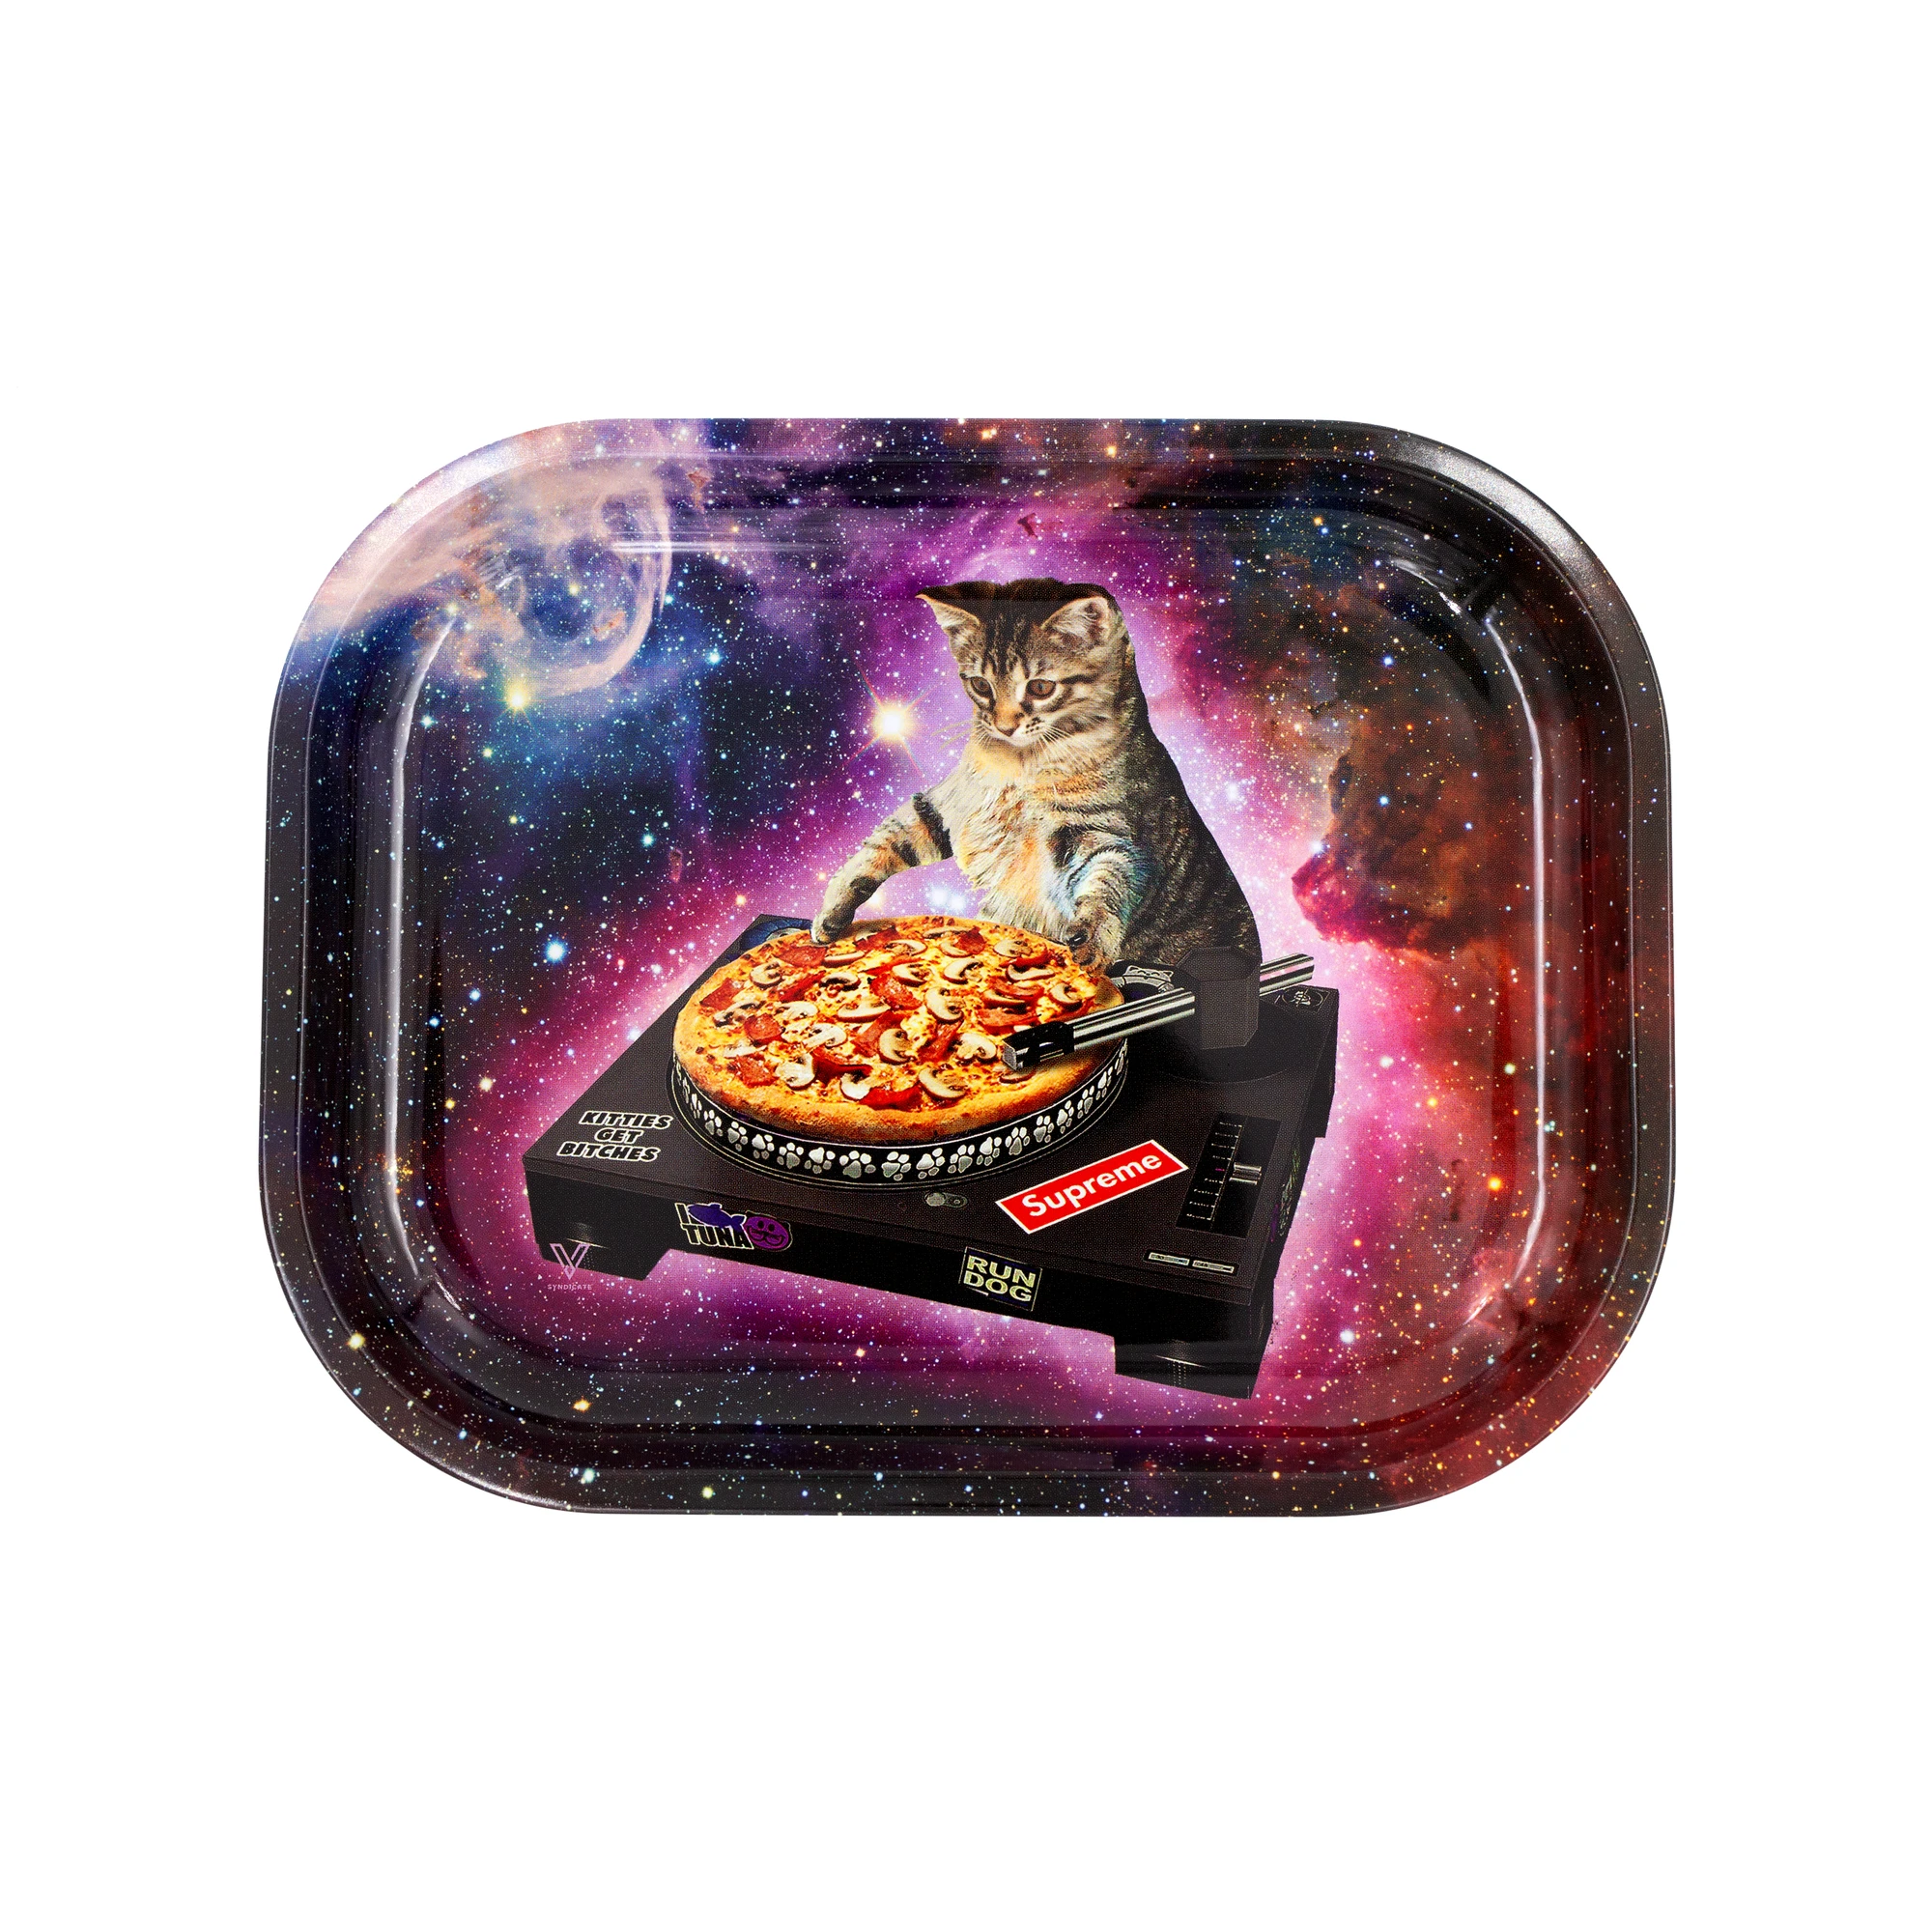 v syndicate metal rolling tray pussy vinyl small